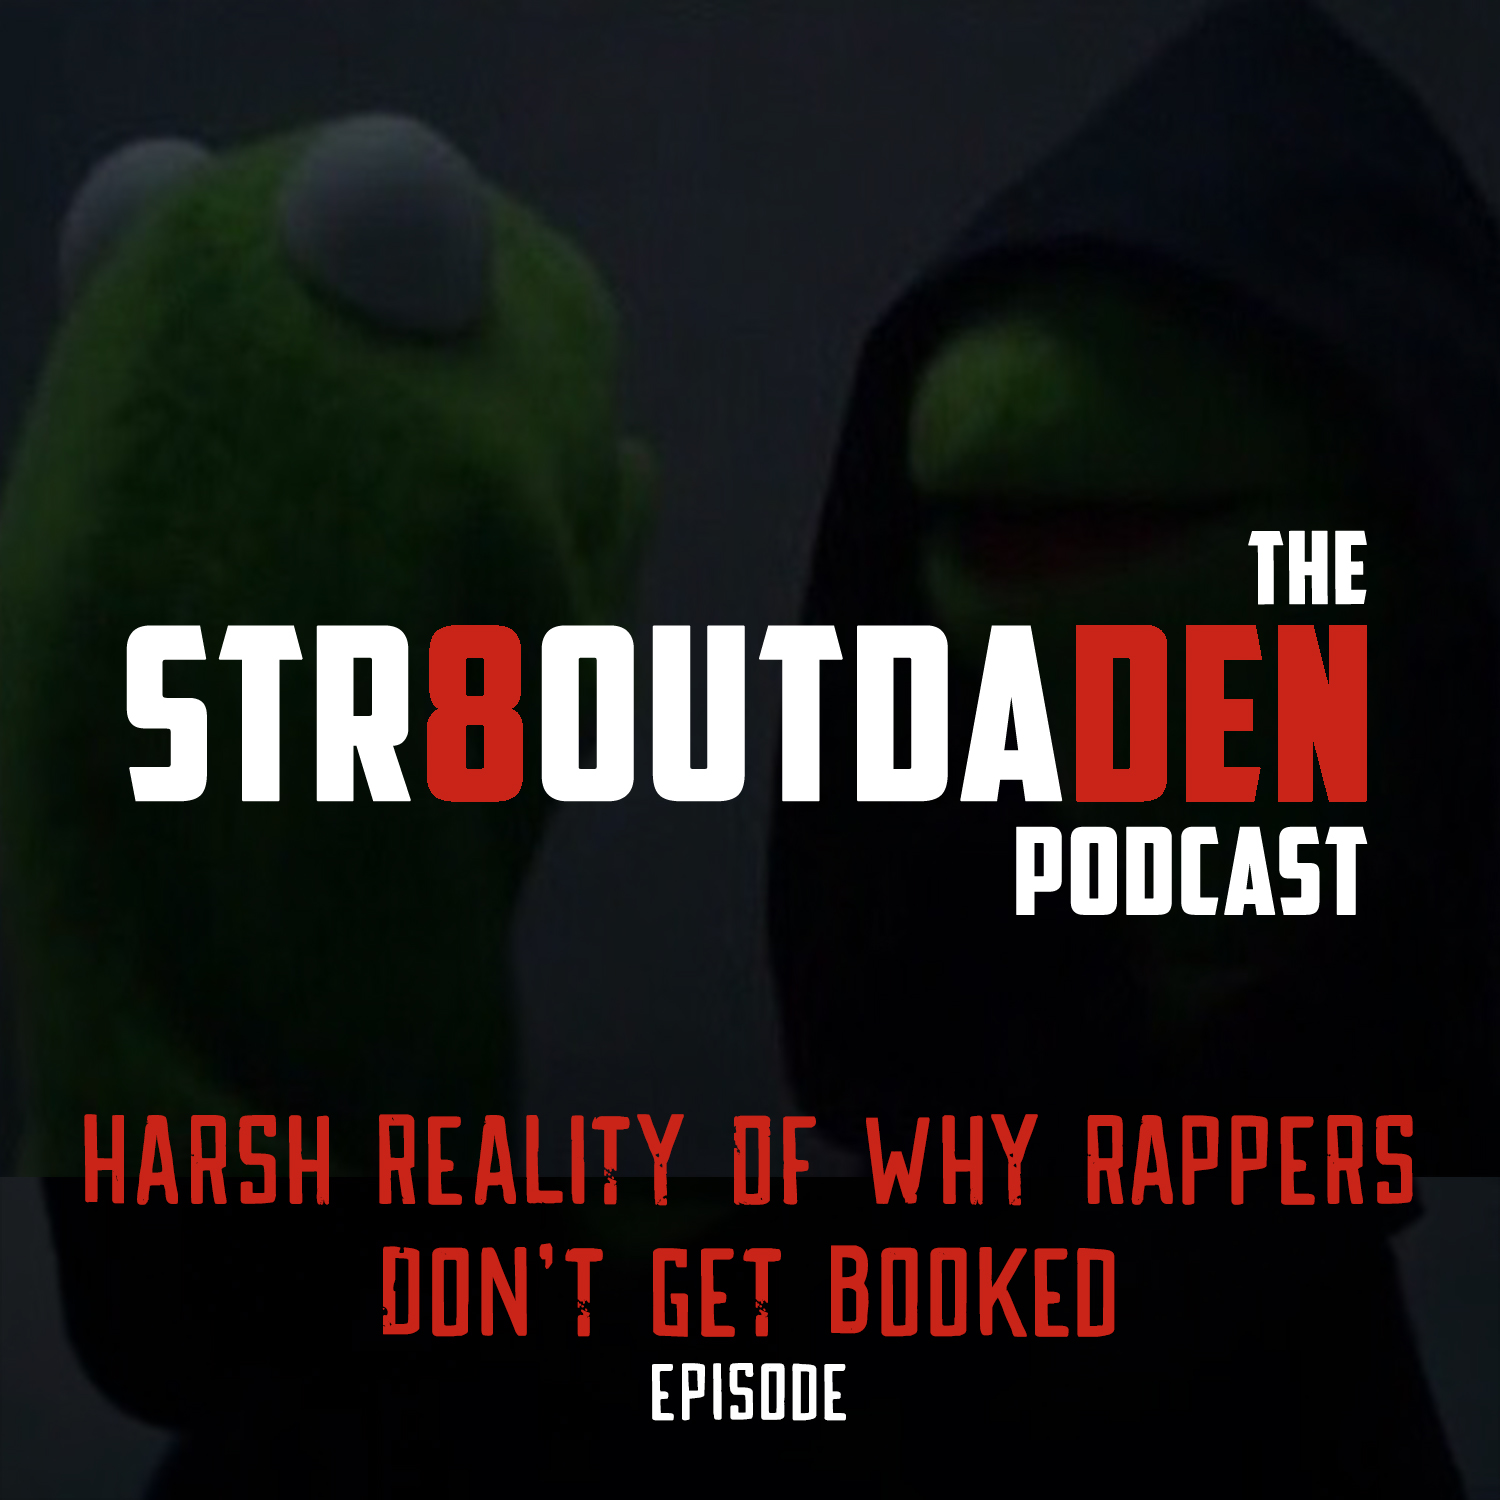 Str8OutDaDen Podcast: The Harsh Reality Of Why Rappers Don’t Get Booked